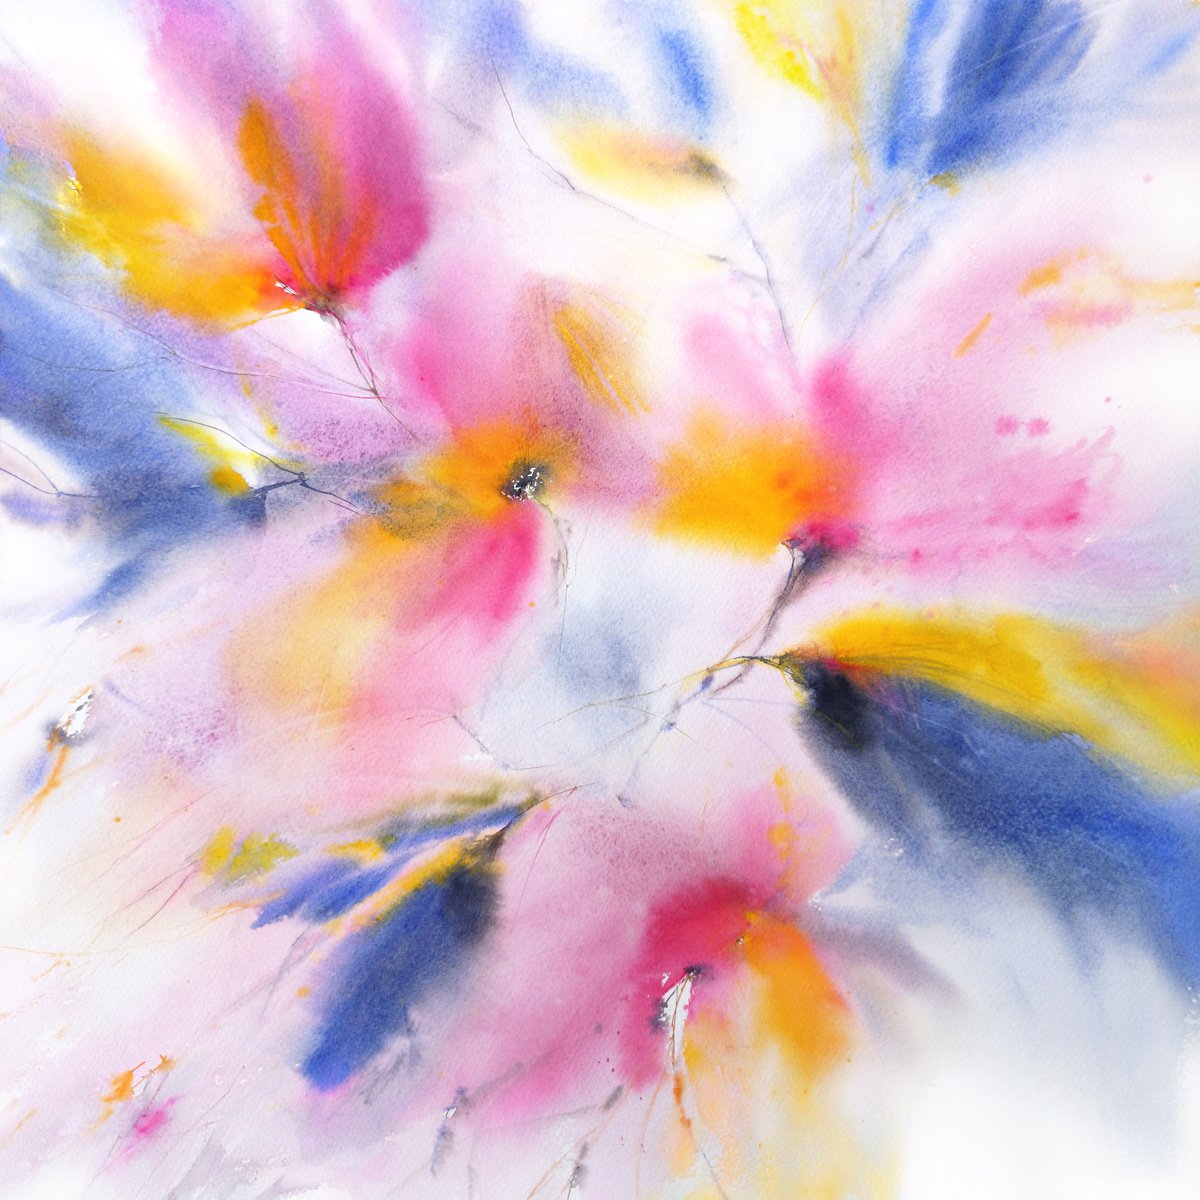 Abstract floral painting Love around by Olya Grigo